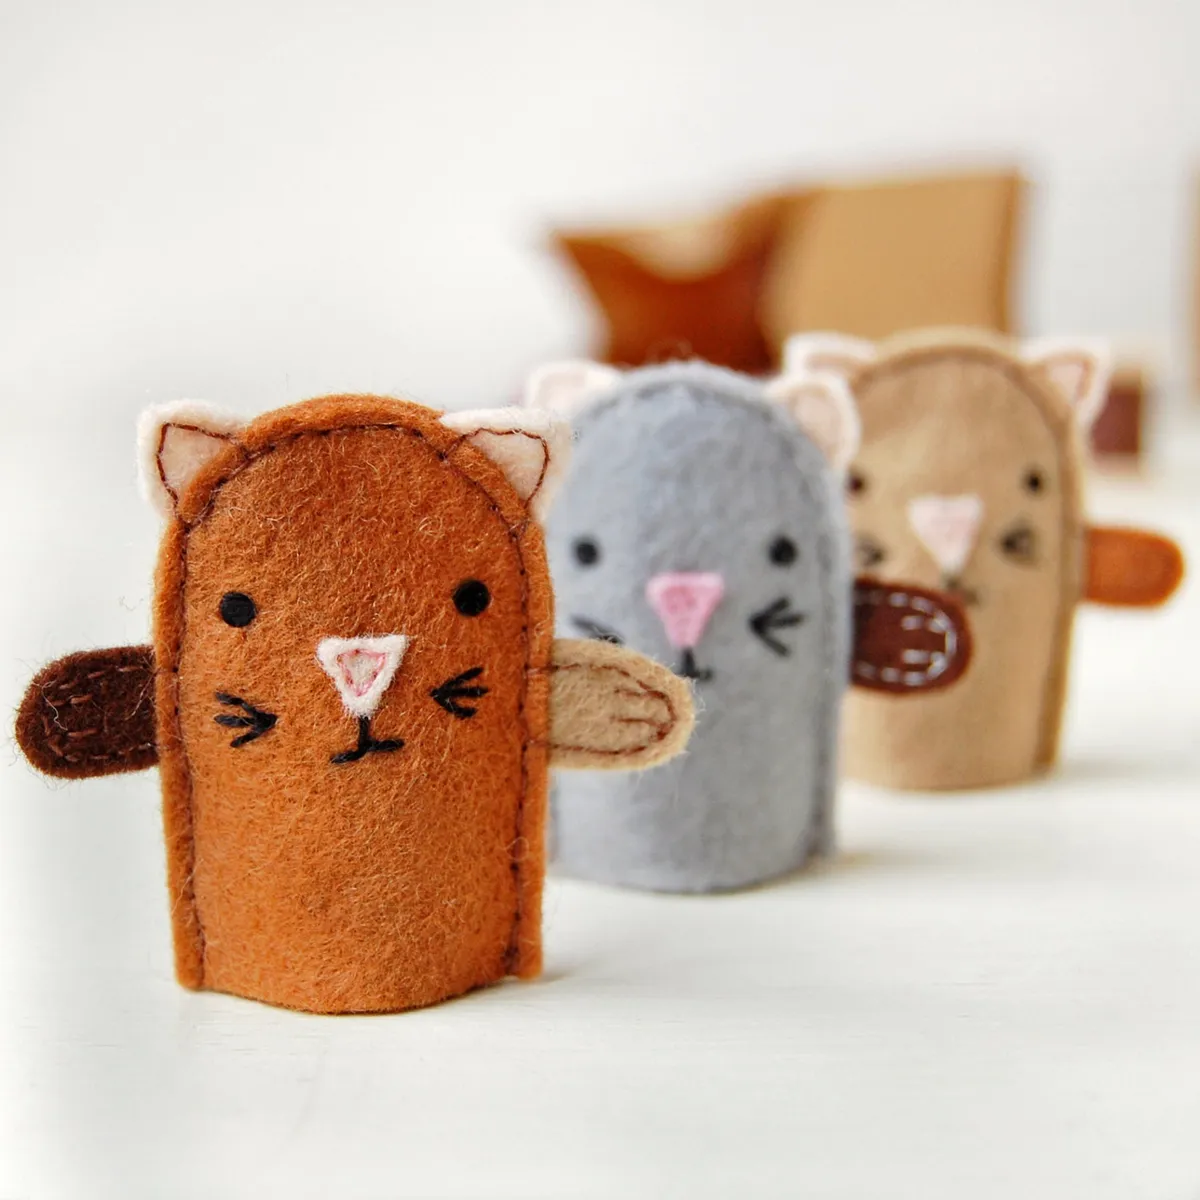 Finger puppet sewing kits